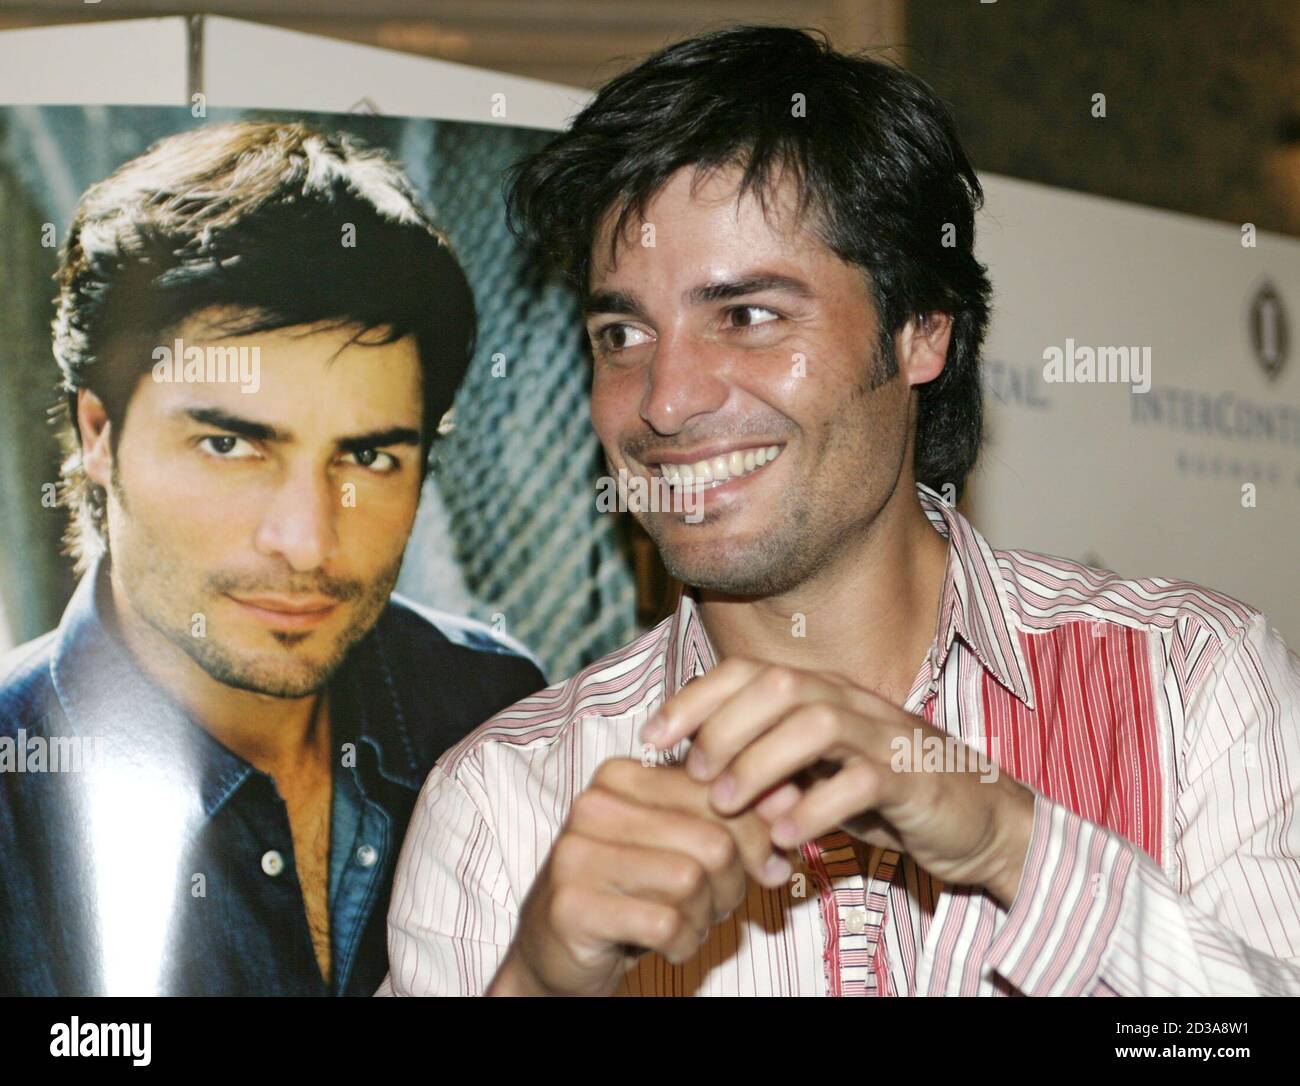 Puerto Rican singer and actor Chayanne, born Elmer Figueroa Arce, appears prior to a press conference in Buenos Aires, Argentina, March 8, 2004. Chayanne presented his latest album "Sincero" and announced a North American tour that will take him across the United States through April 2004. REUTERS/Enrique Marcarian  EM/GAC Stock Photo